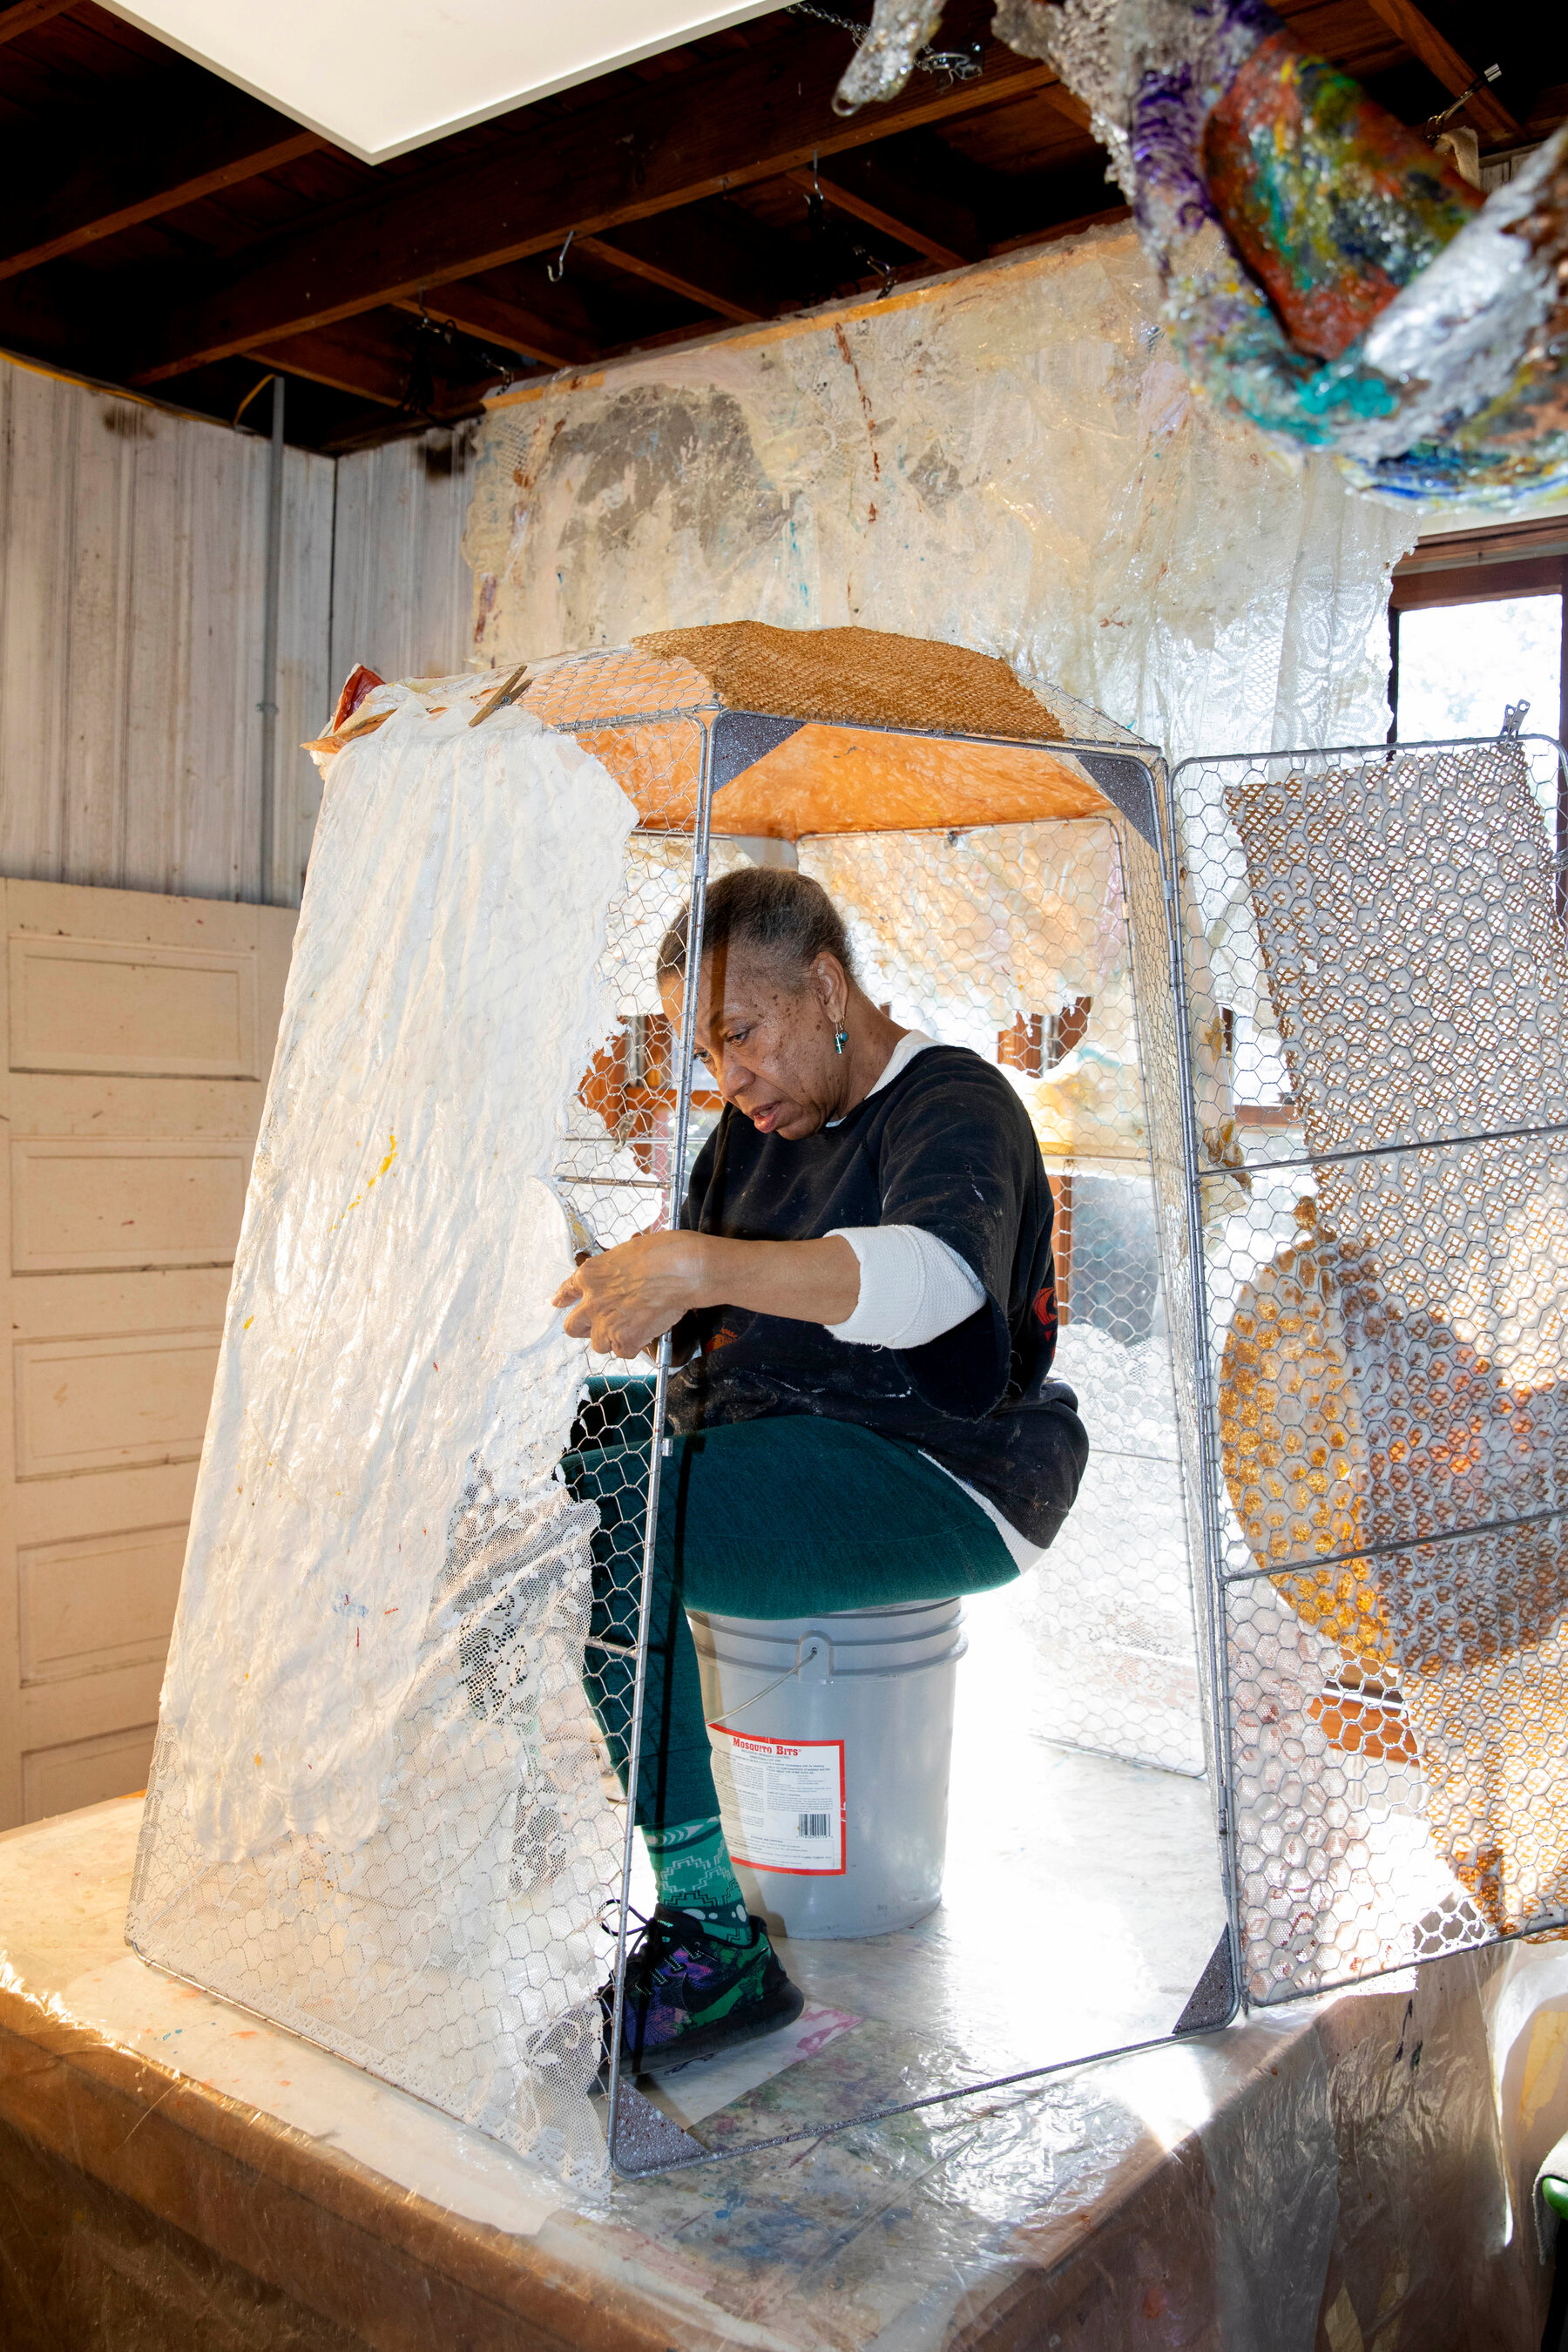 Suzanne Jackson sits on a bucket assembling a sculptural work involving paper or plastic and wire mesh.